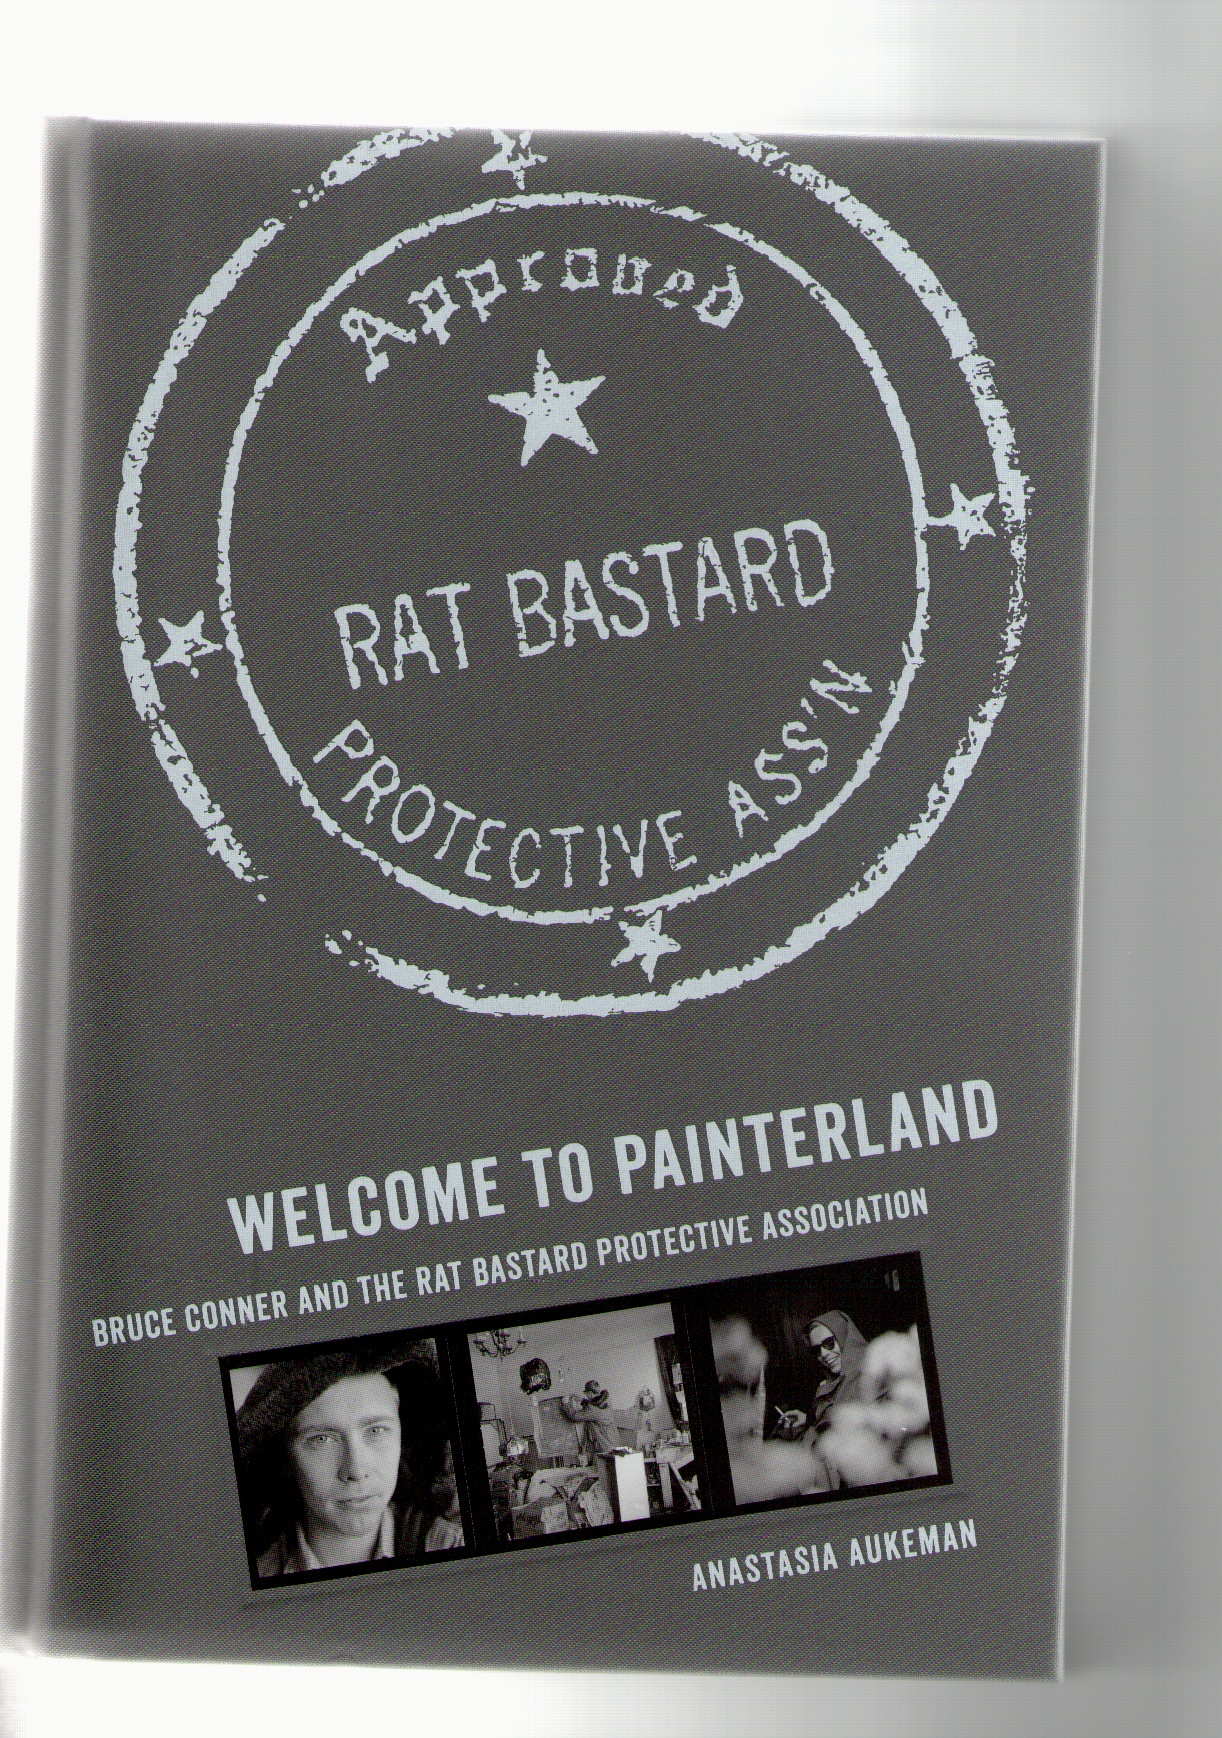 CONNER, Bruce; AUKEMAN, Anastasia (author) - Welcome to Painterland. Bruce Conner and the Rat Bastard Protective Association